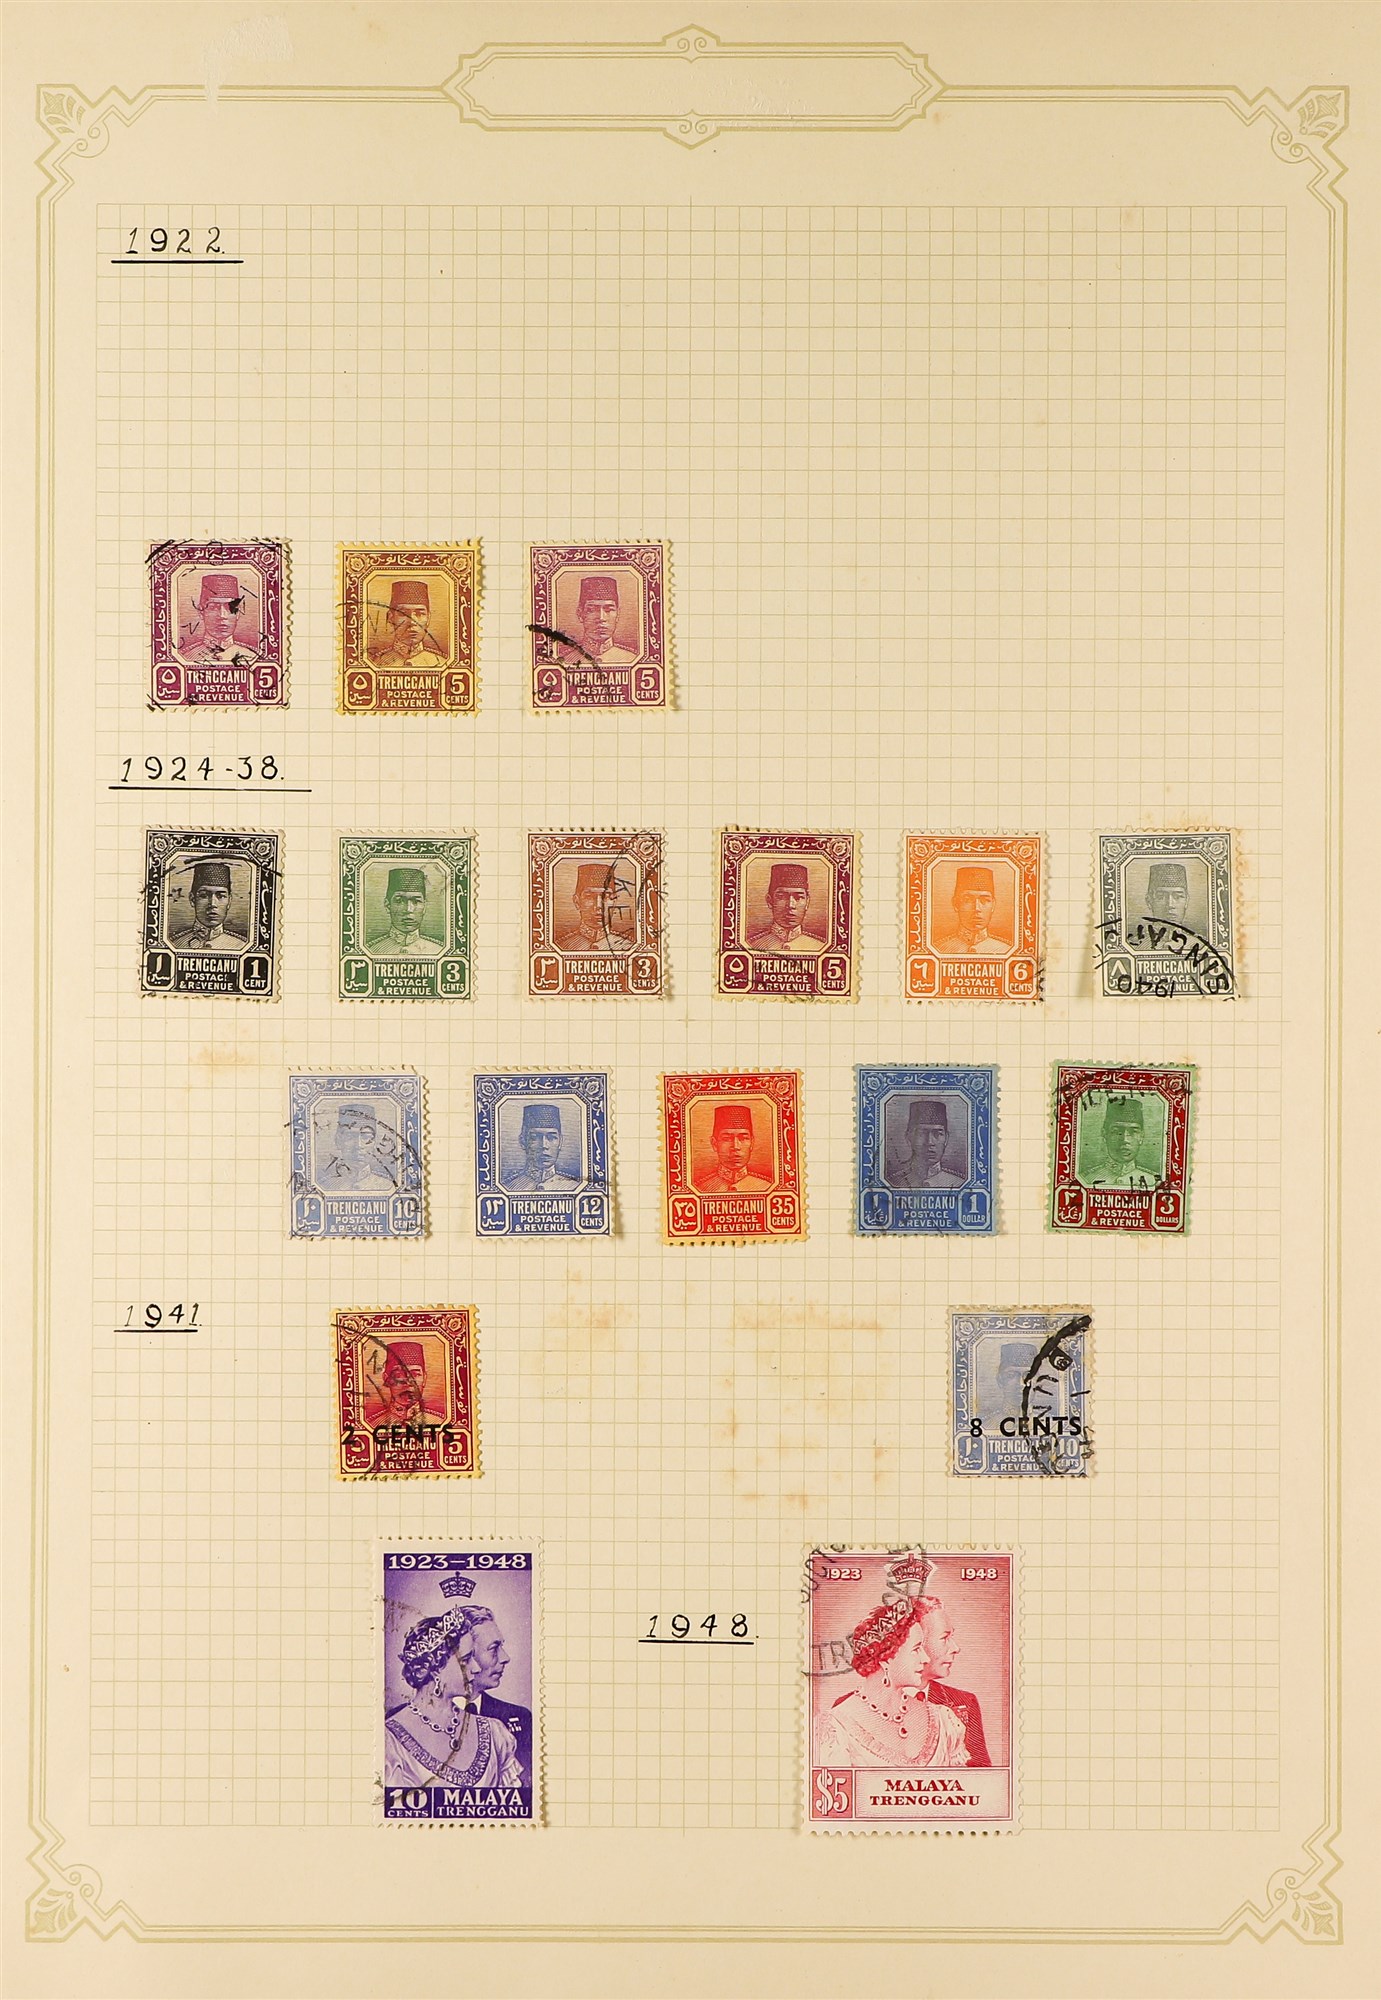 MALAYA STATES TRENGGANU 1910 - 1986 collection of 120+ used stamps on album pages, stc £900+ not - Image 3 of 8